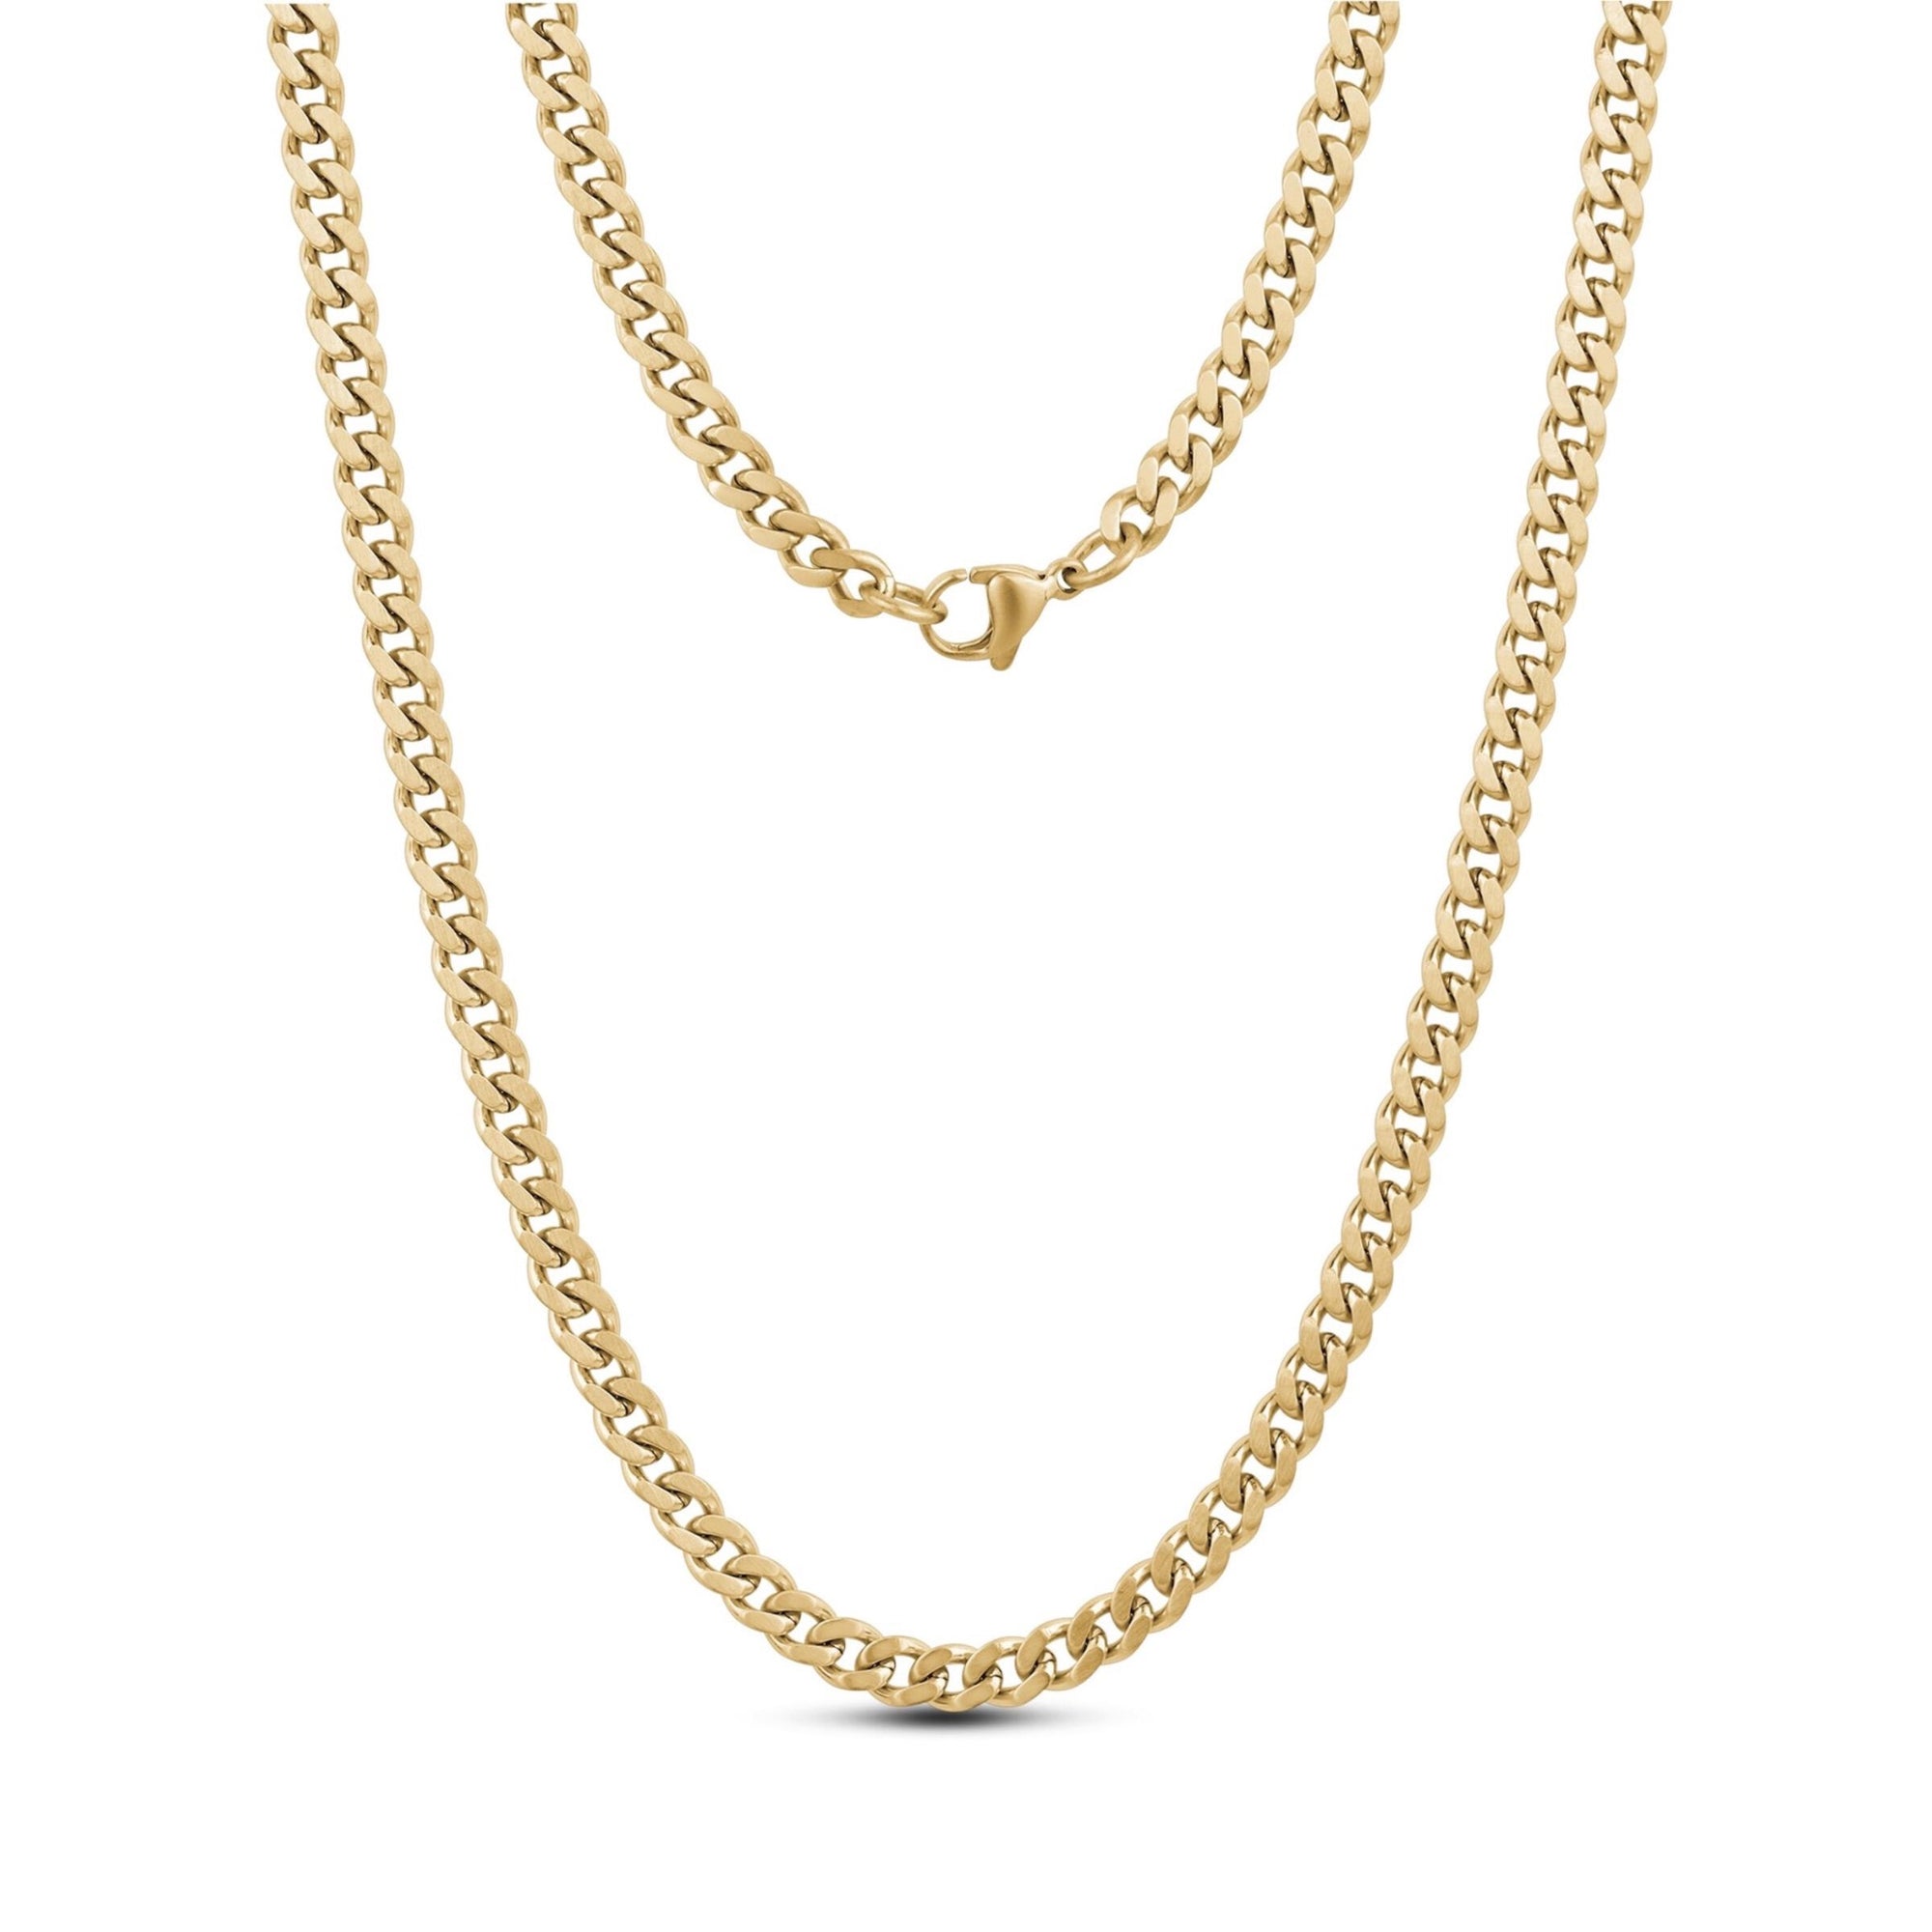 5mm Matte Cuban Link Steel Chain Necklace at Arman's Jewellers